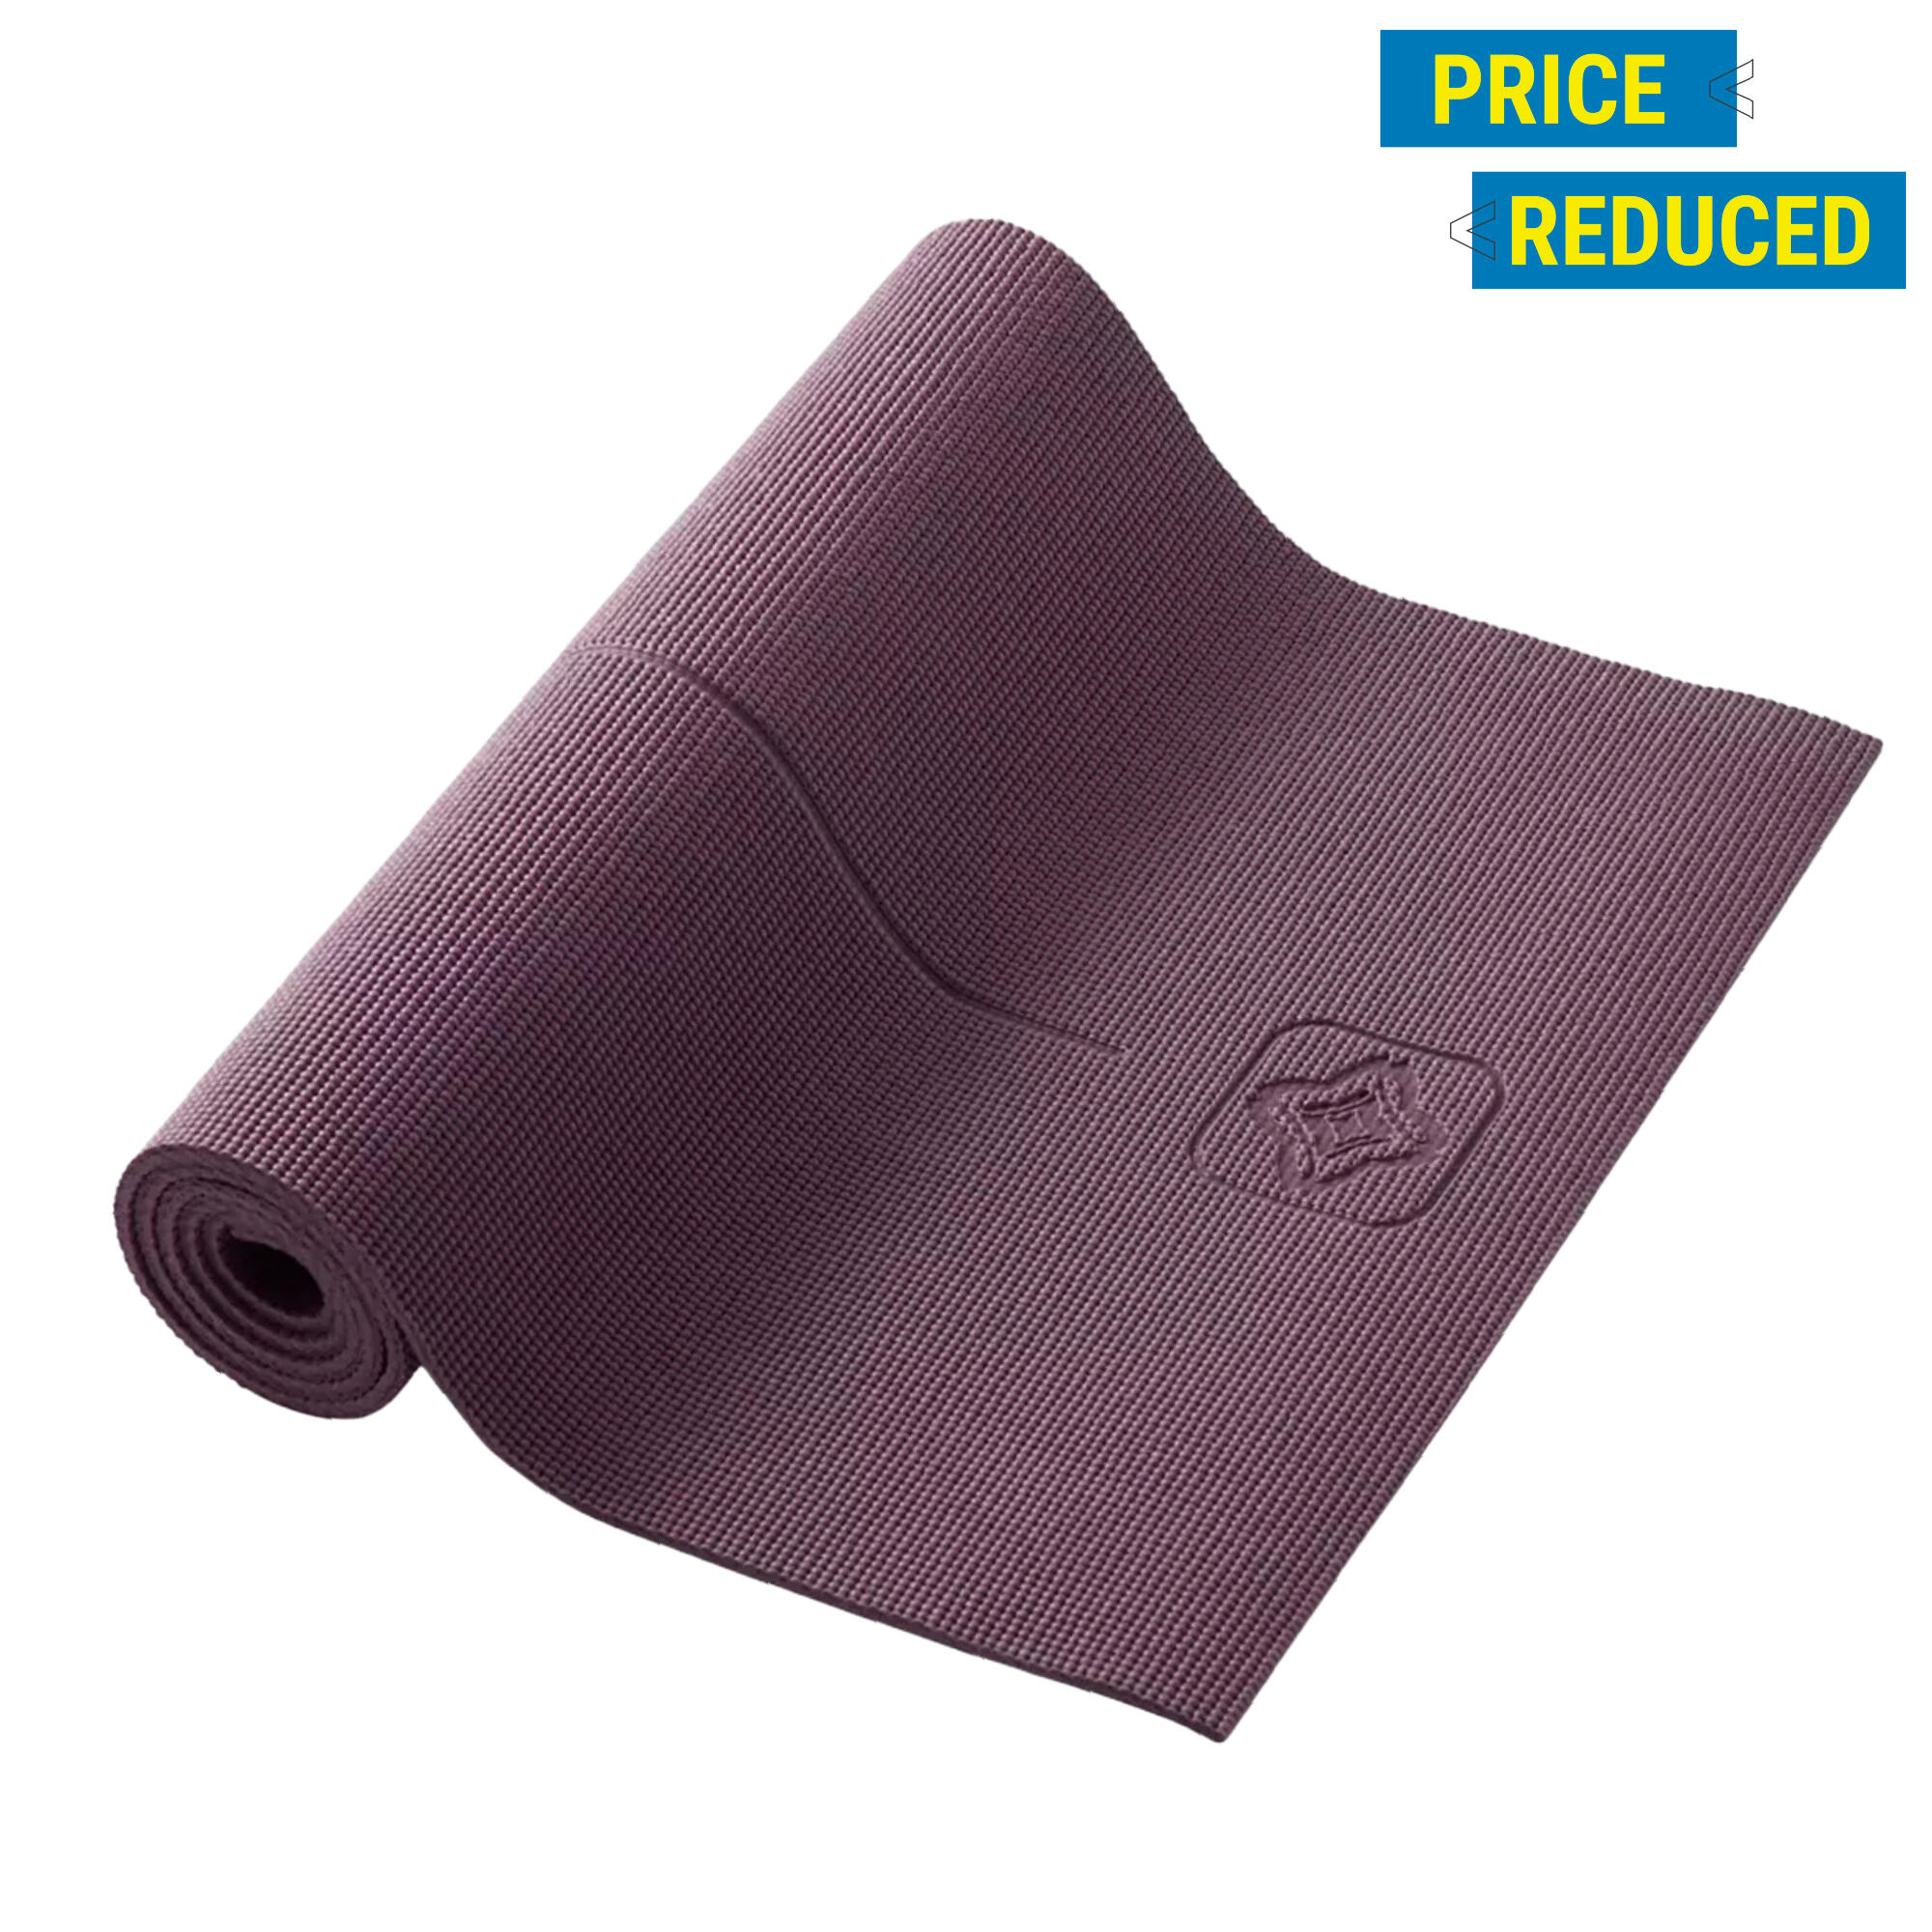 Take A Breath - Buy Yoga Apparels, Mats and Accessories at Decathlon Sports  India